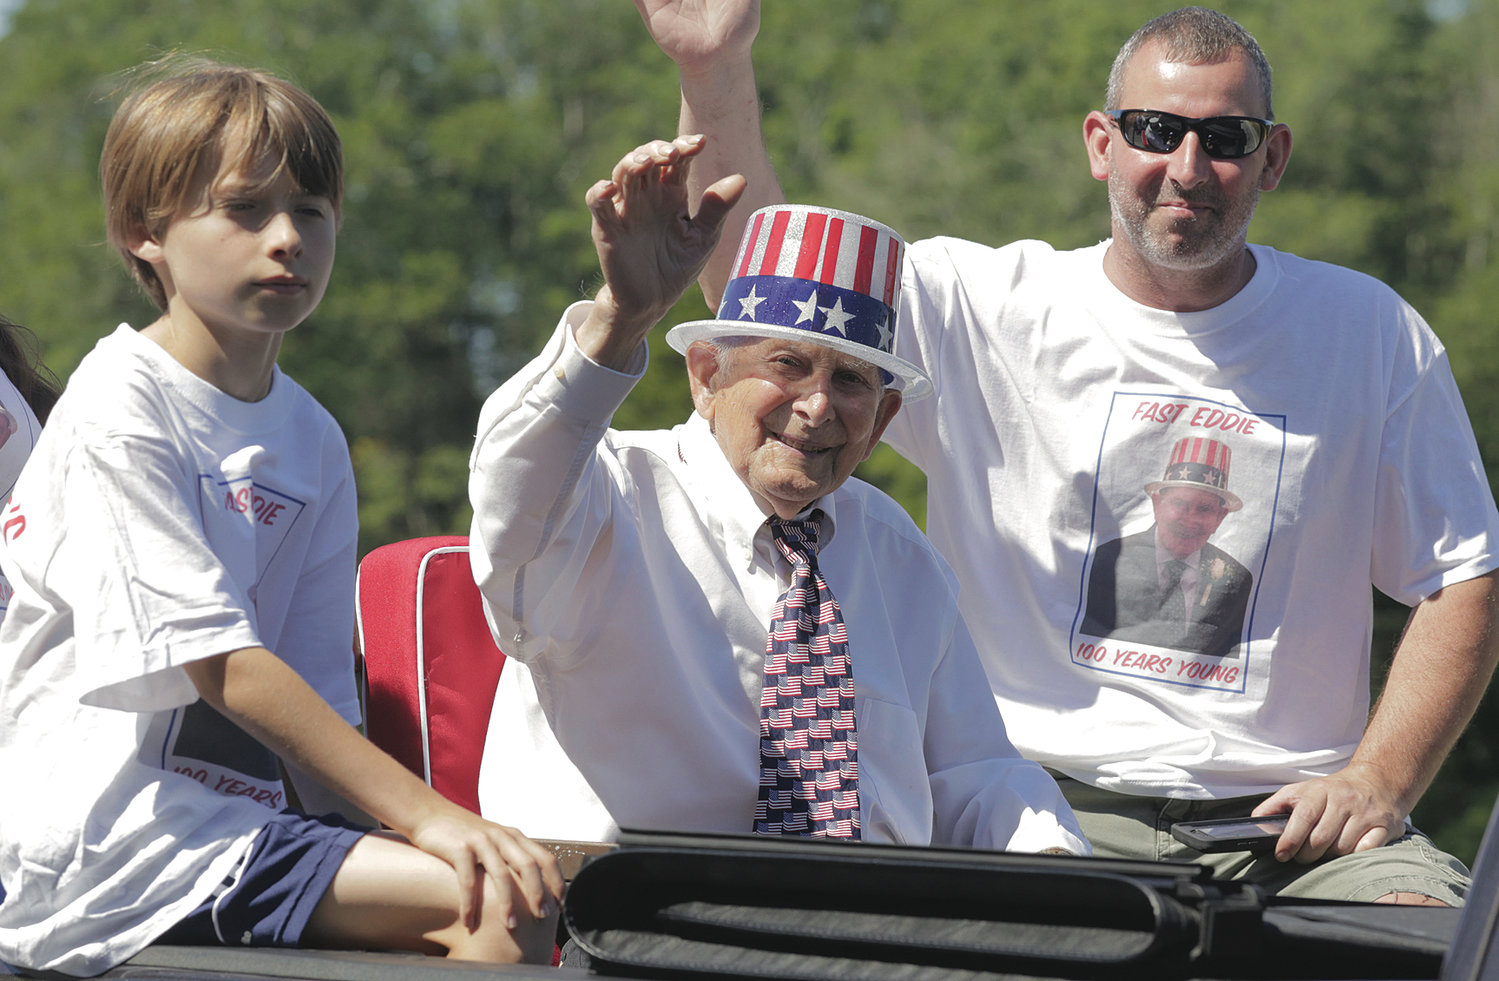 Eddie "Fast Eddie" Beaulieu, this year's Grand Marshal, during the 2016 parade shortly after his 100th birthday.